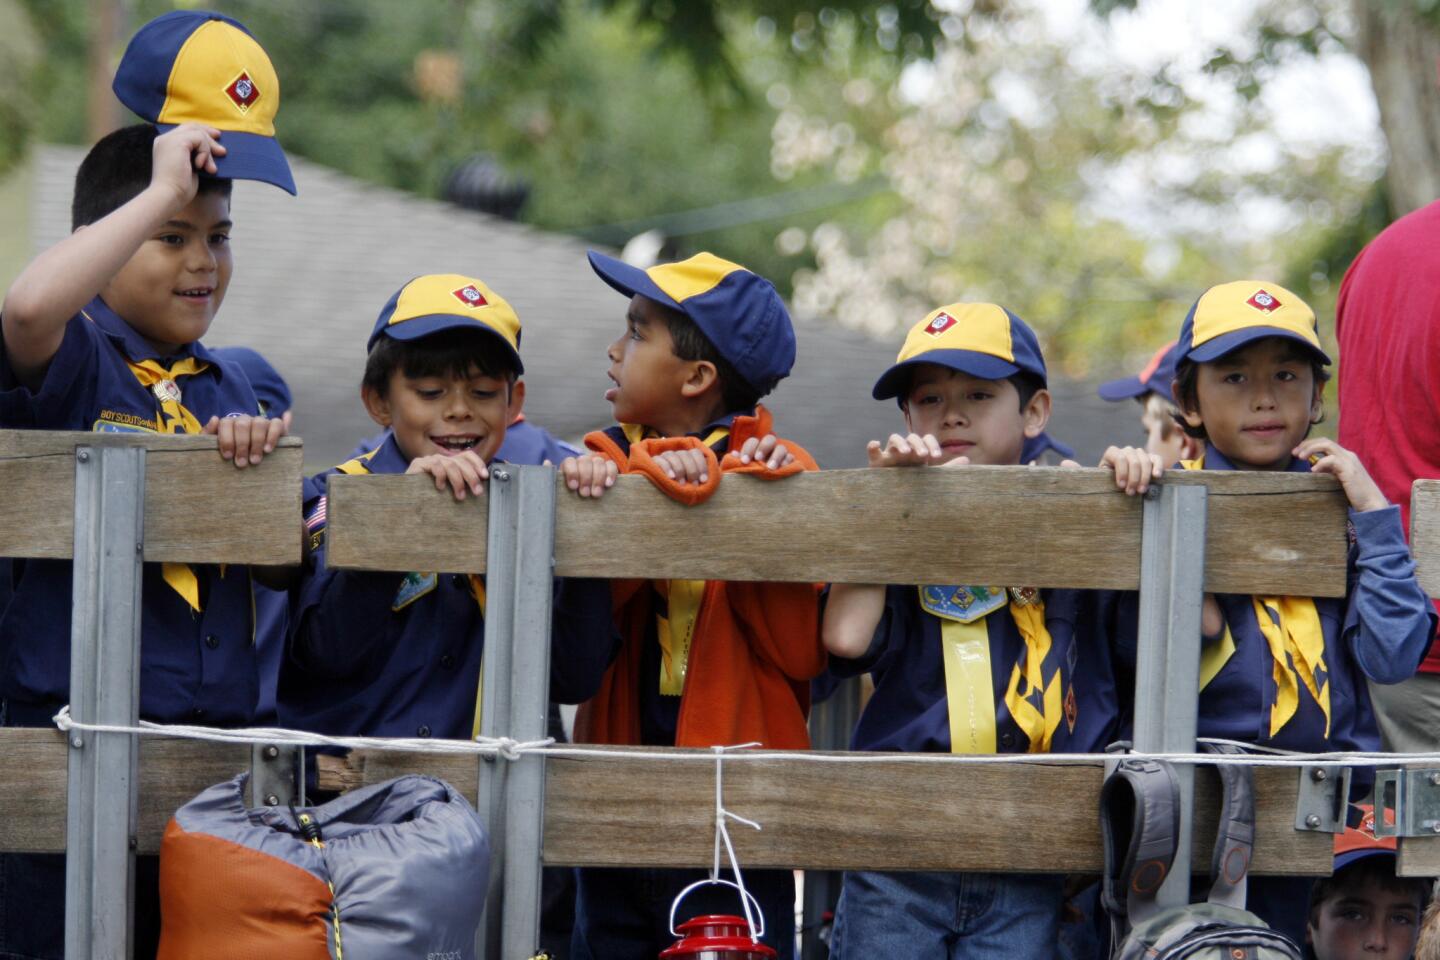 Cub Scouts Pack 225 members Joseph Anasacio, 7, from left, Elijah Zuniga, 7, Max Crosby, 8, Evan Sanchez, 7, and Frank Leszczynski, 7, wait on a truck before participating in Burbank on Parade, which took place on Olive Ave. between Keystone St. and Lomita St. on Saturday, April 14, 2012.